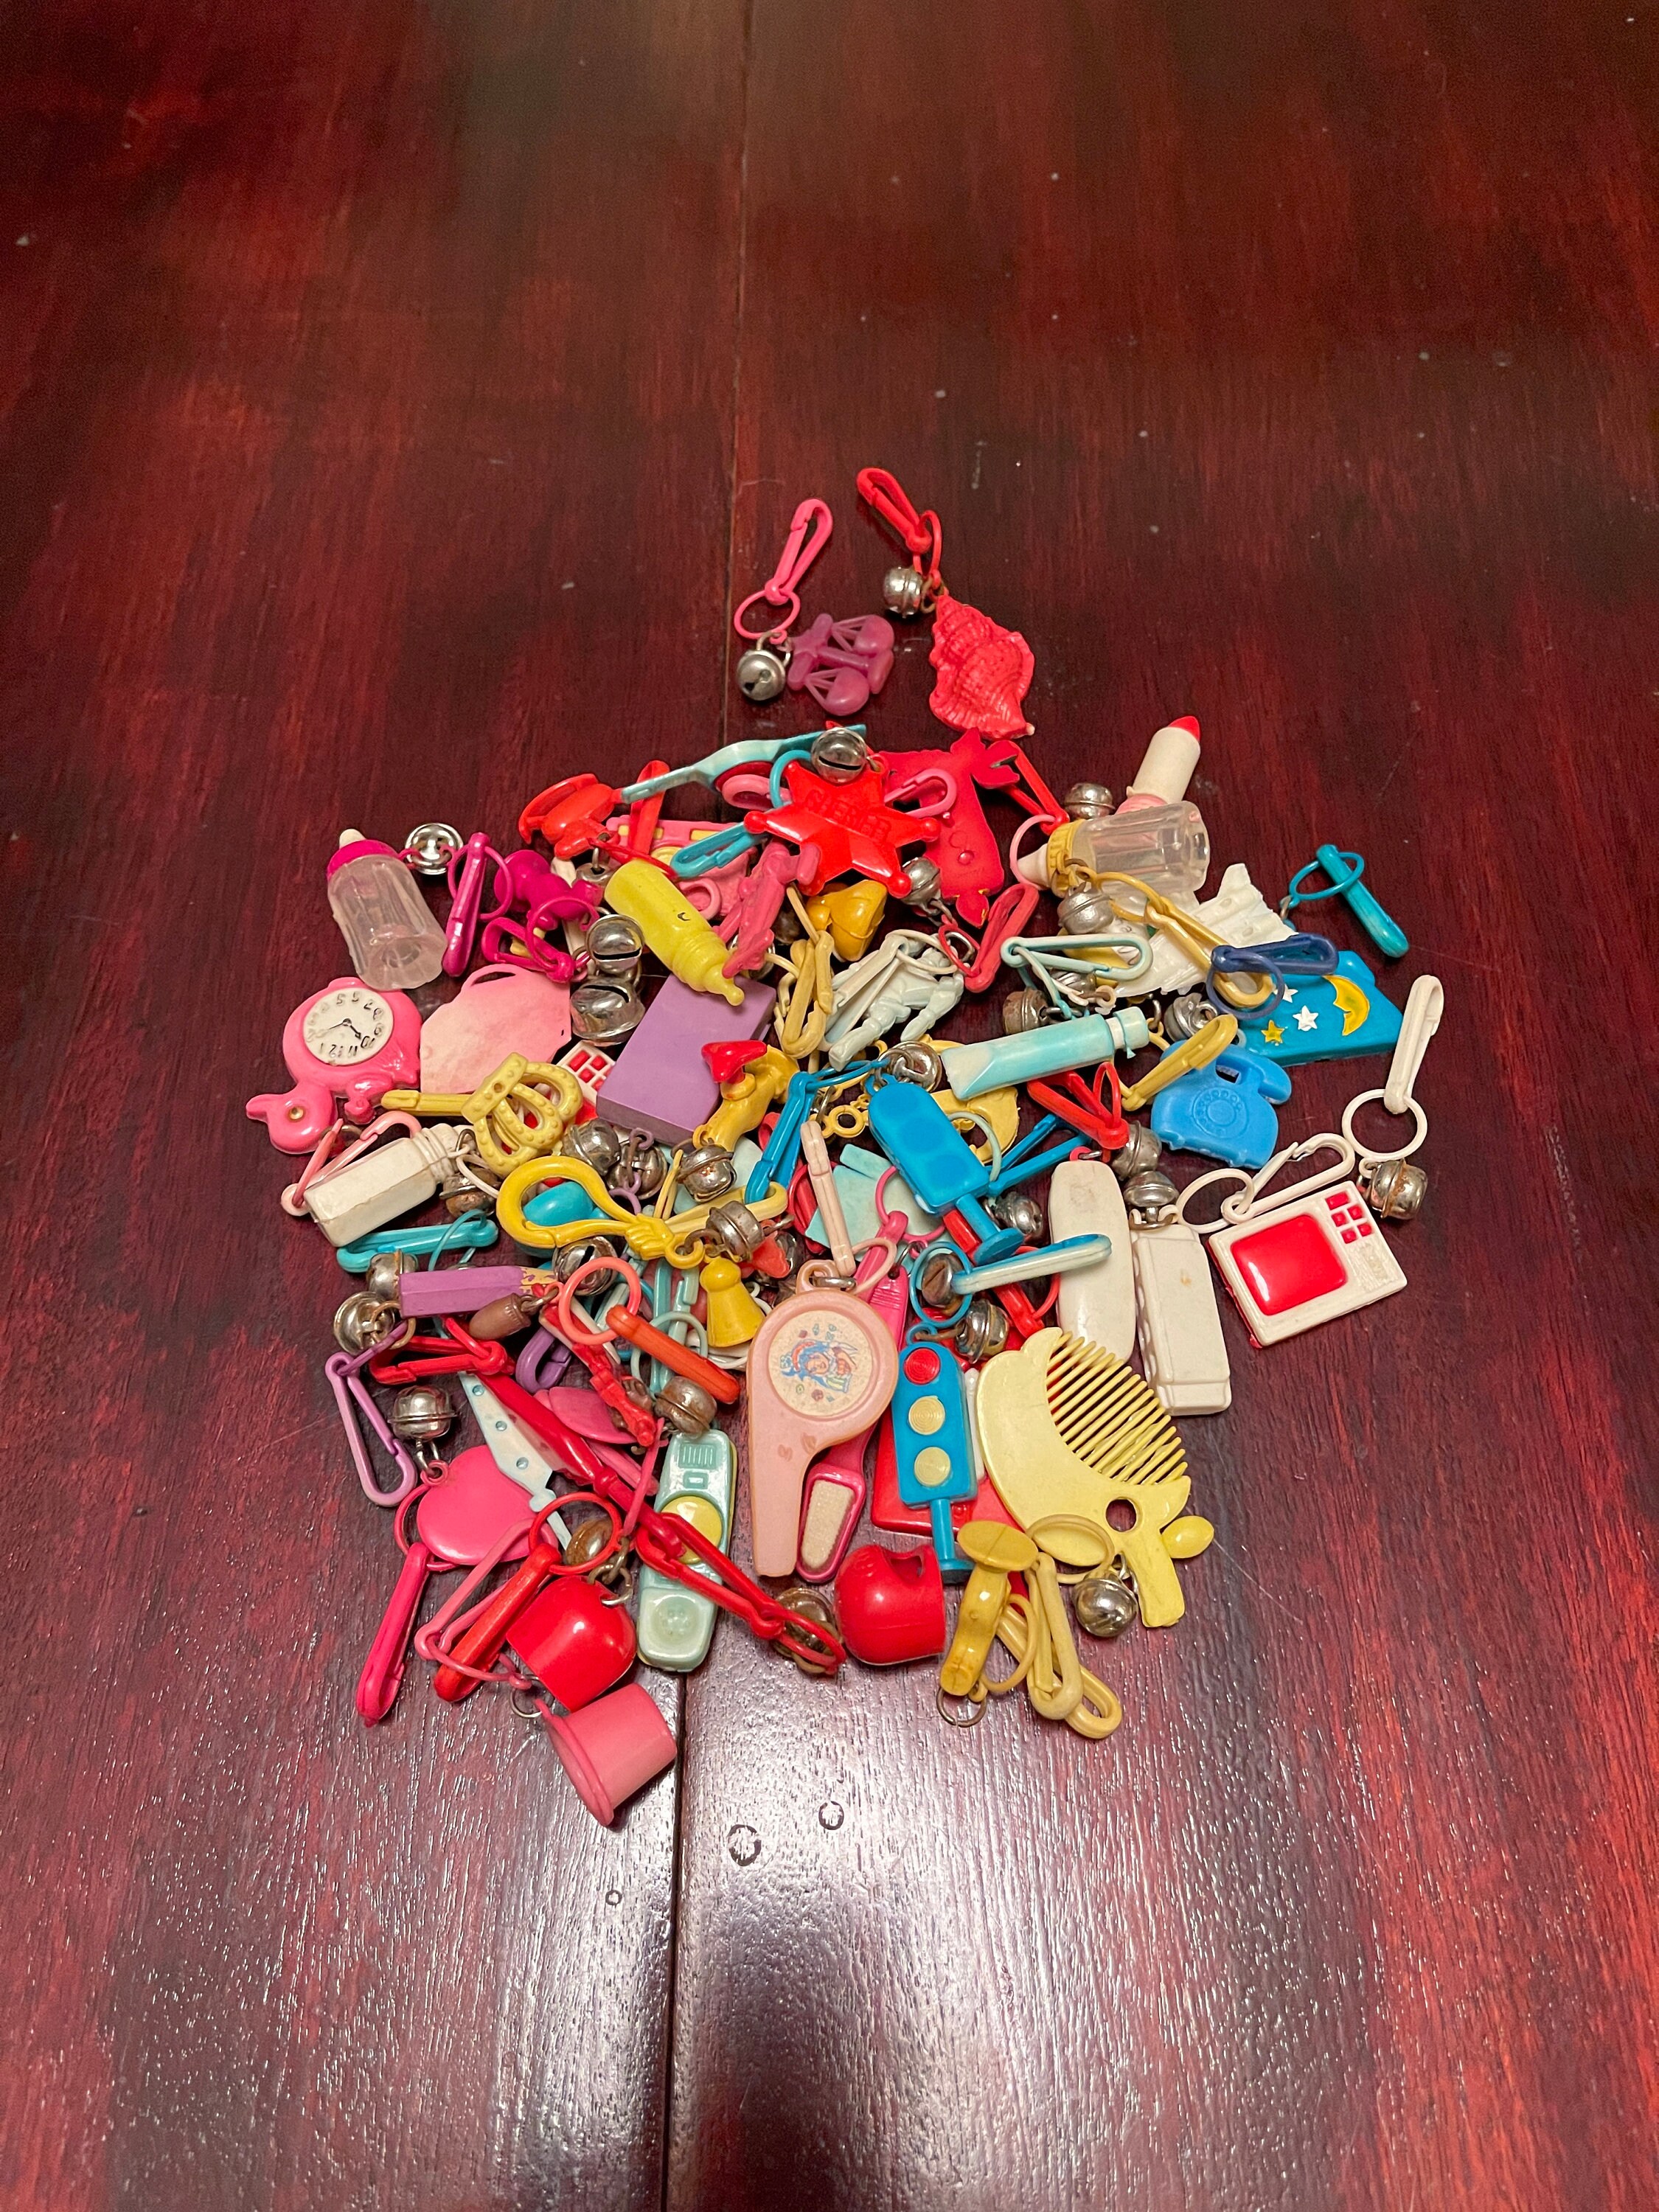 1980s Plastic Charm Bracelets & Necklaces. I LOVED THEMhad a ton. Anyone  else remember these lil beauties…